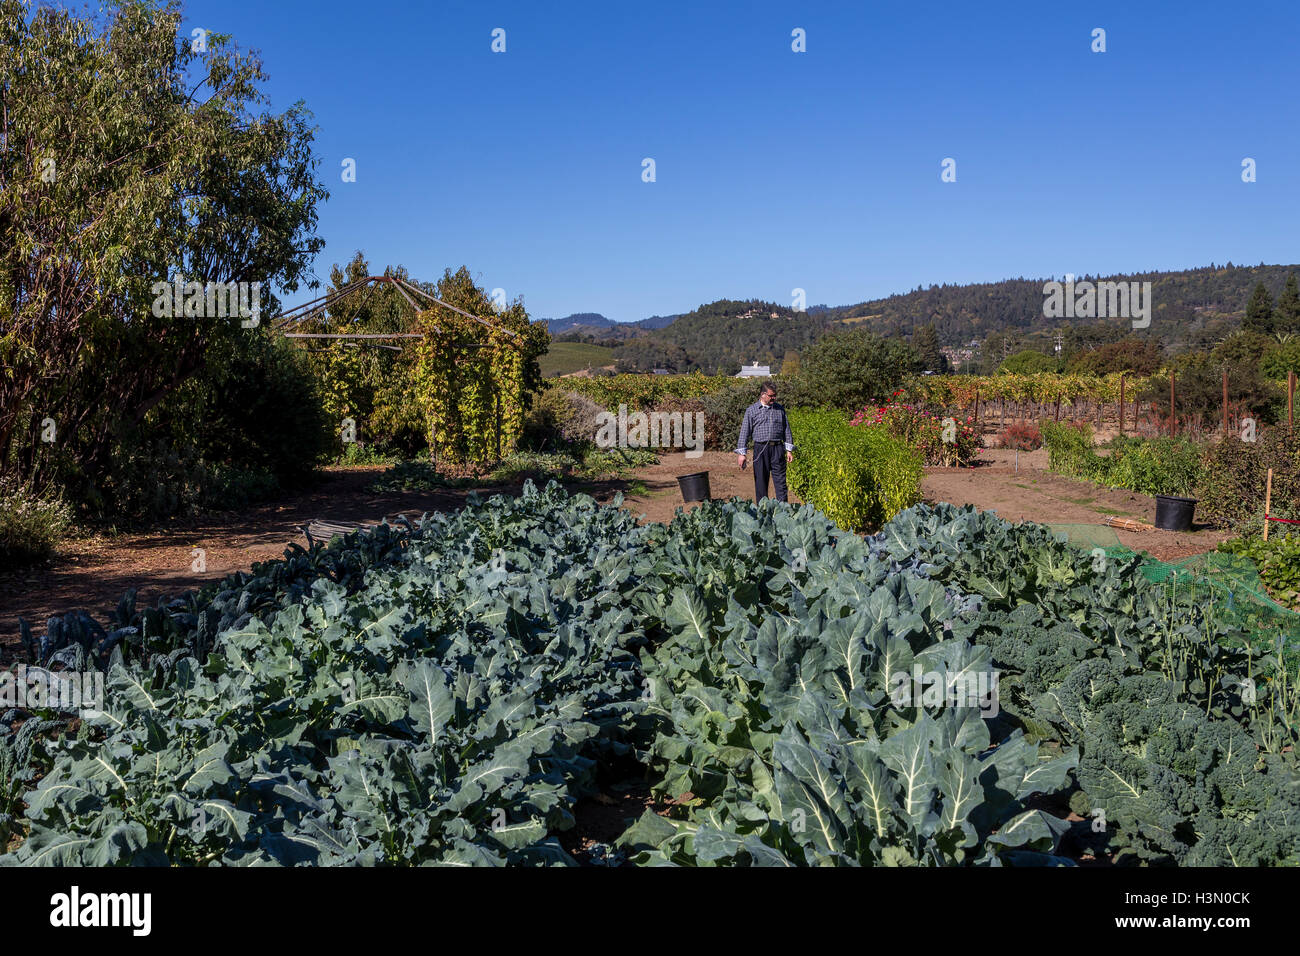 culinary garden, Frog’s Leap Winery, Frogs Leap Winery, Frogs Leap, Rutherford, Napa Valley, Napa County, California Stock Photo